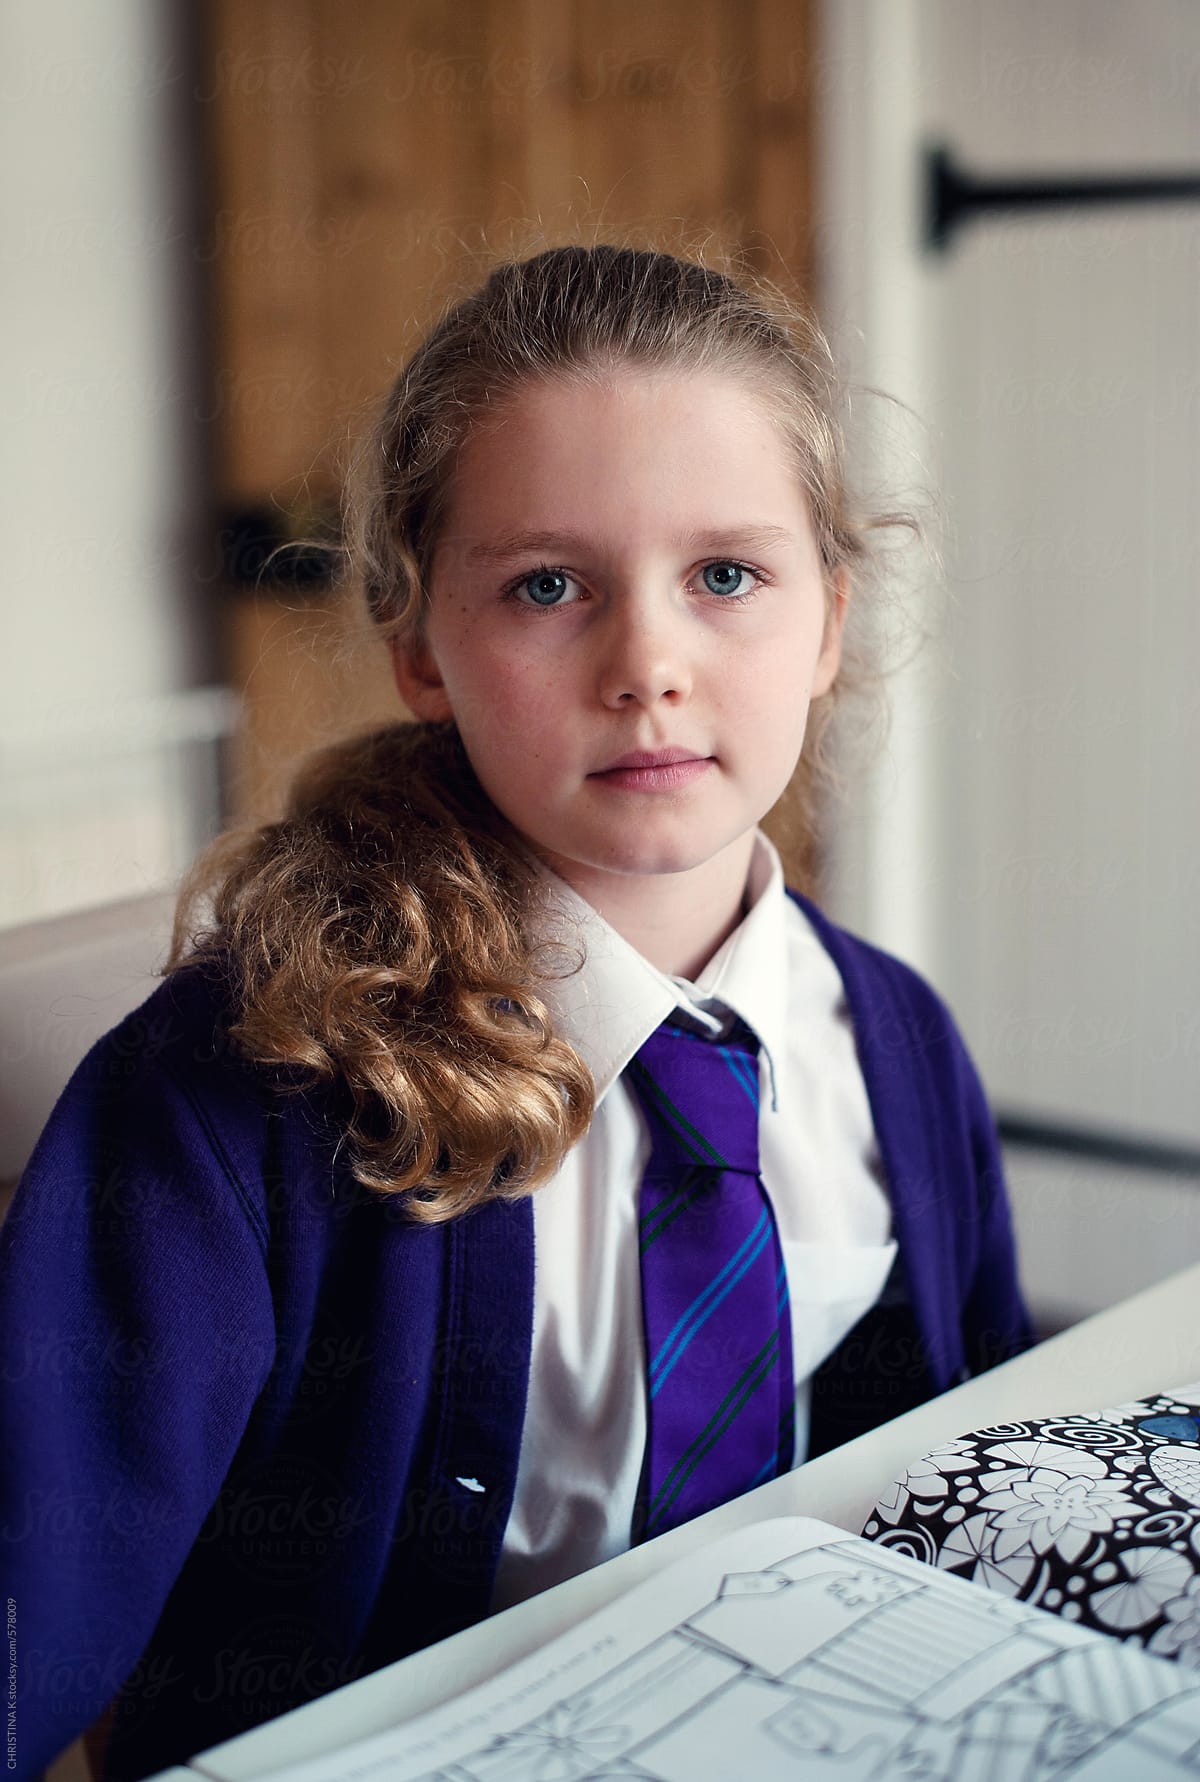 Schoolgirl sitting at the table after school